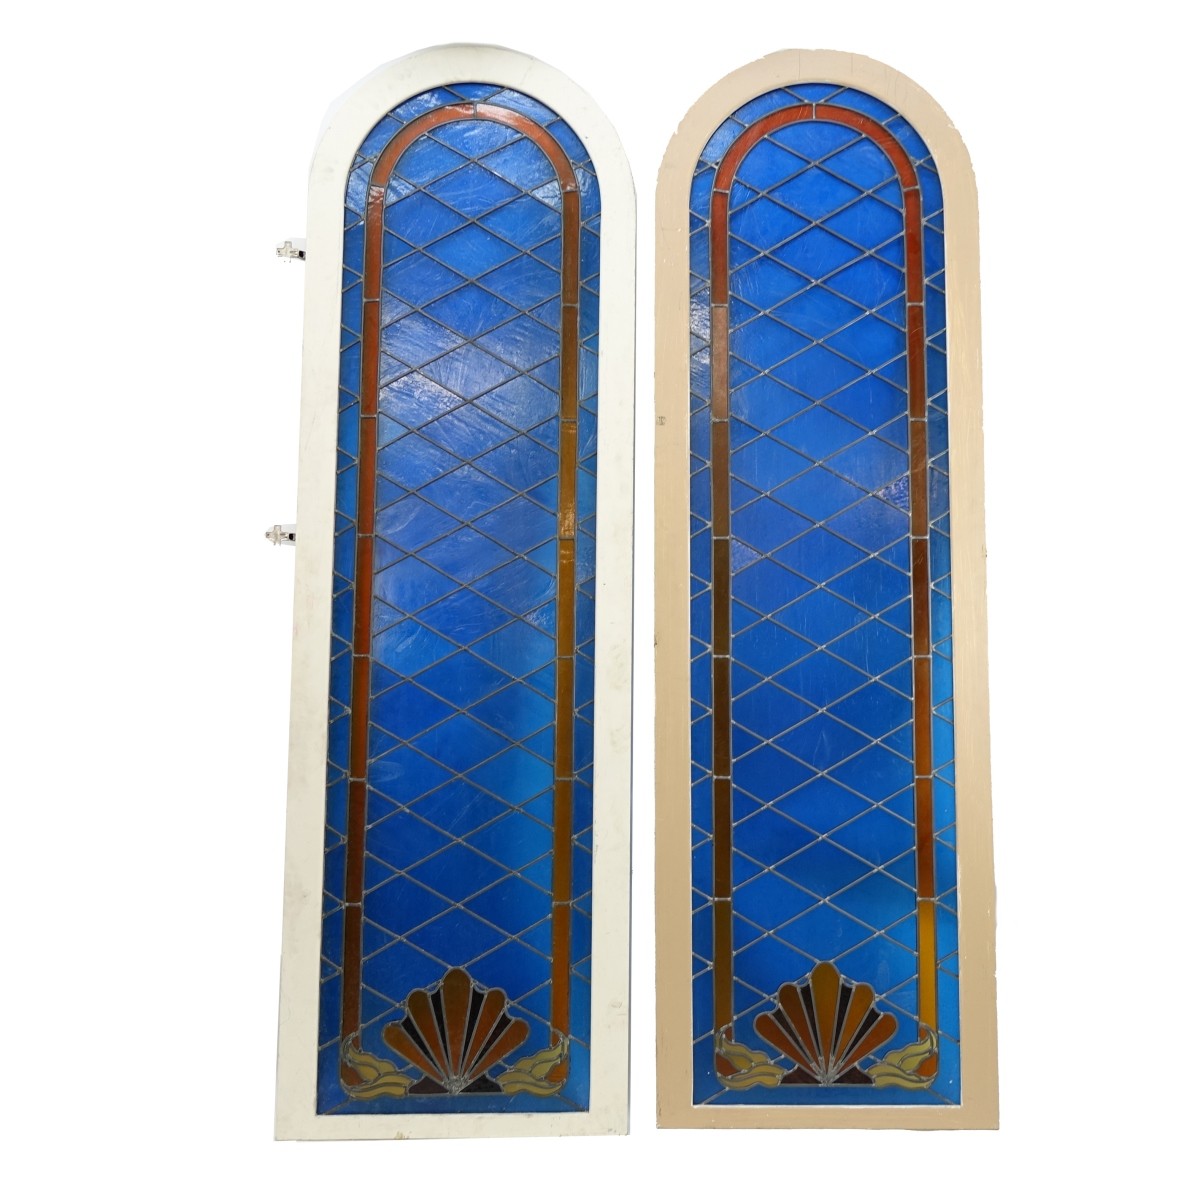 Palace Size 20th C. Leaded Glass Panels